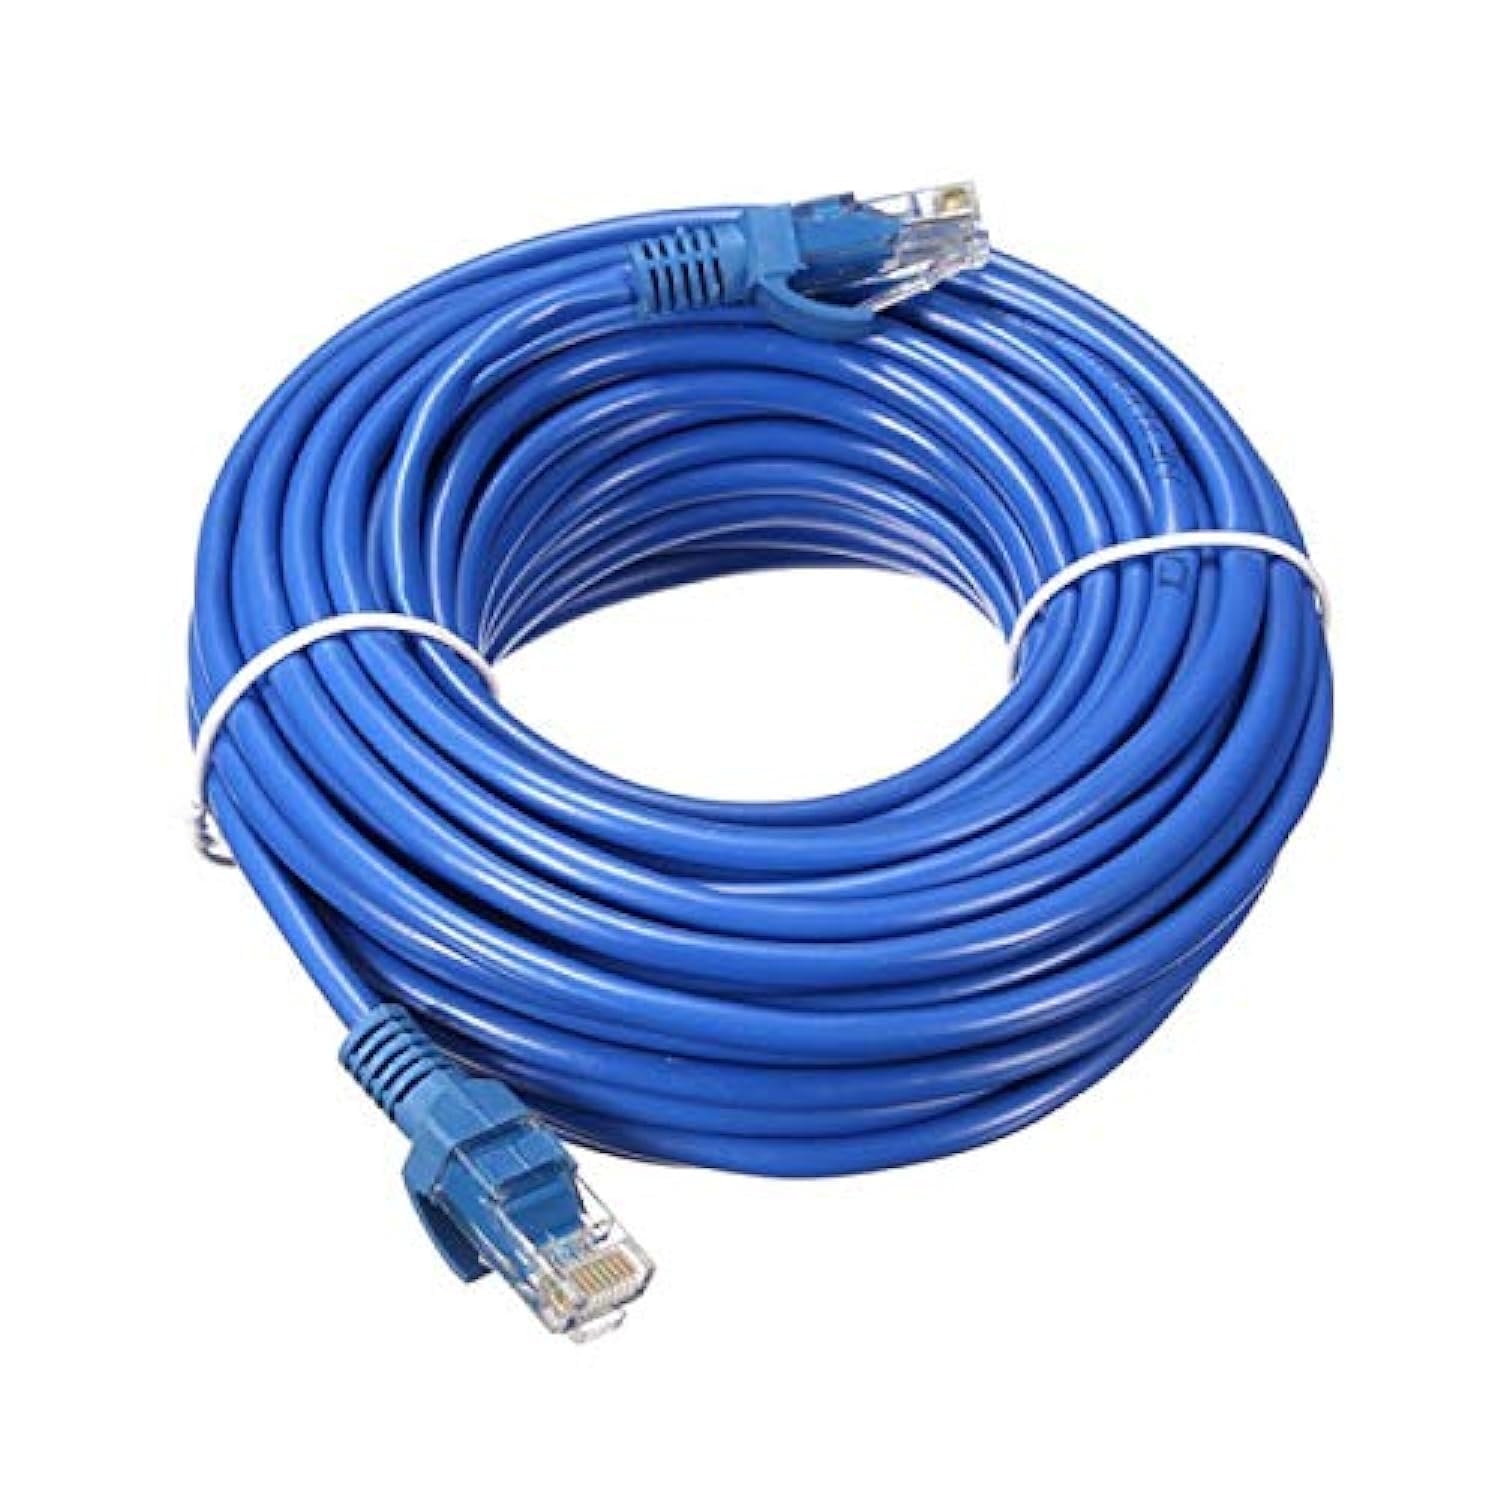 ANDTRONICS CAT-6 Snagless Network RJ45 Ethernet Patch LAN Cable CAT6-30M / 90 ft